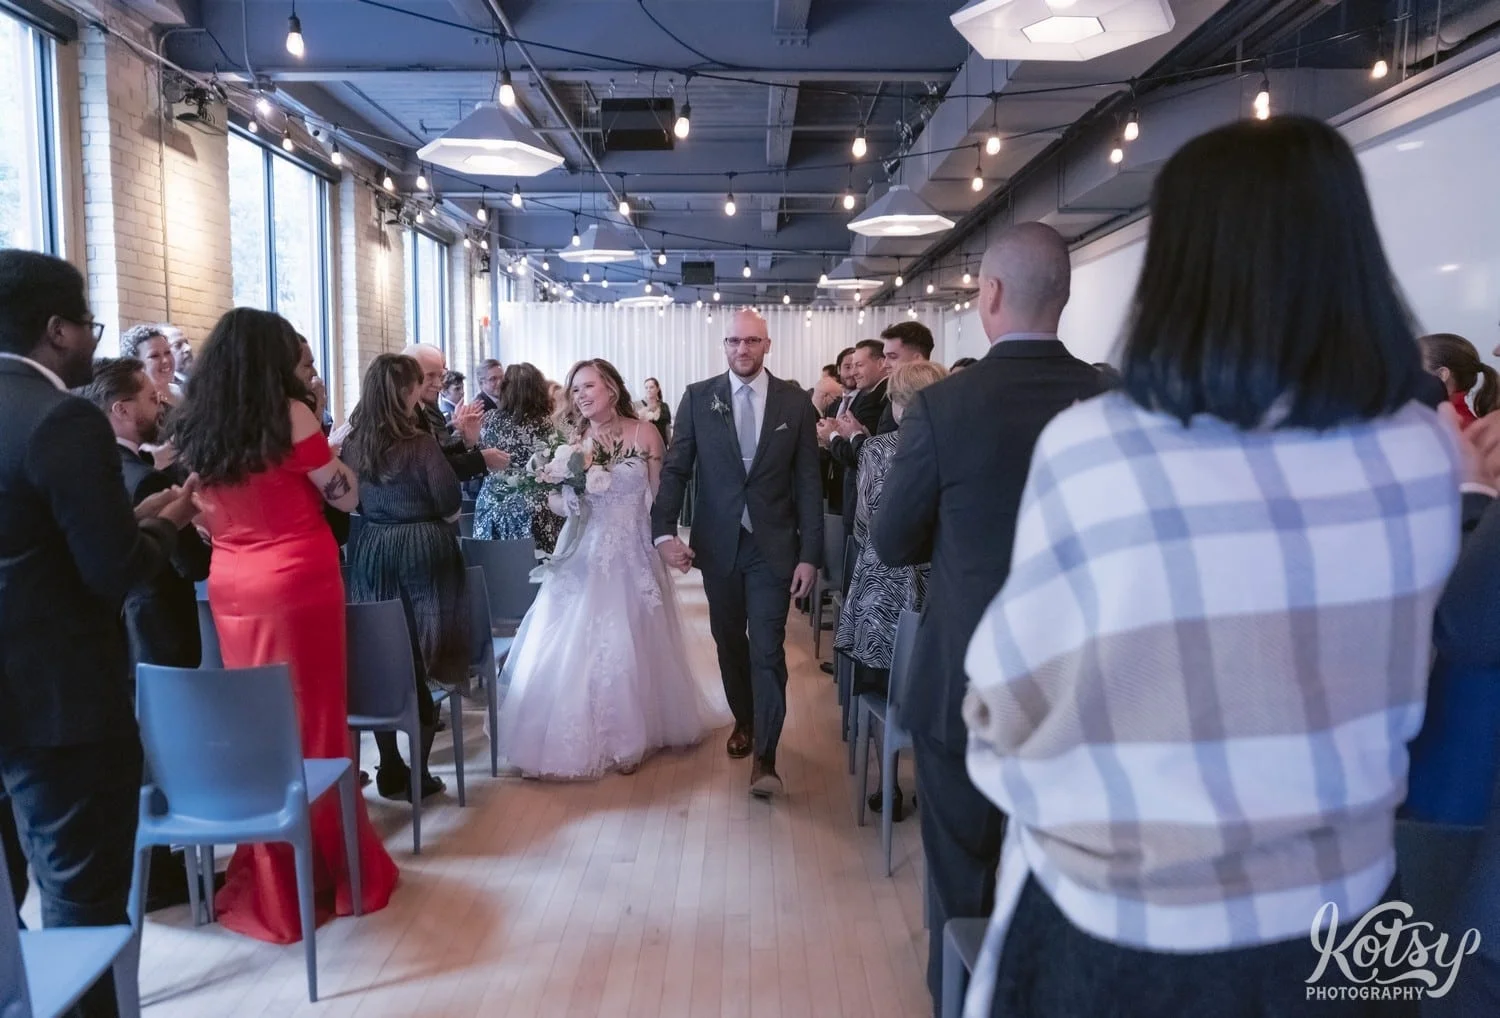 A bride in a white bridal gown walks back up the aisle holding a flower bouquet with her groom wearing a gray suit at the conclusion of their Second Floor Events wedding ceremony in Toronto, Canada